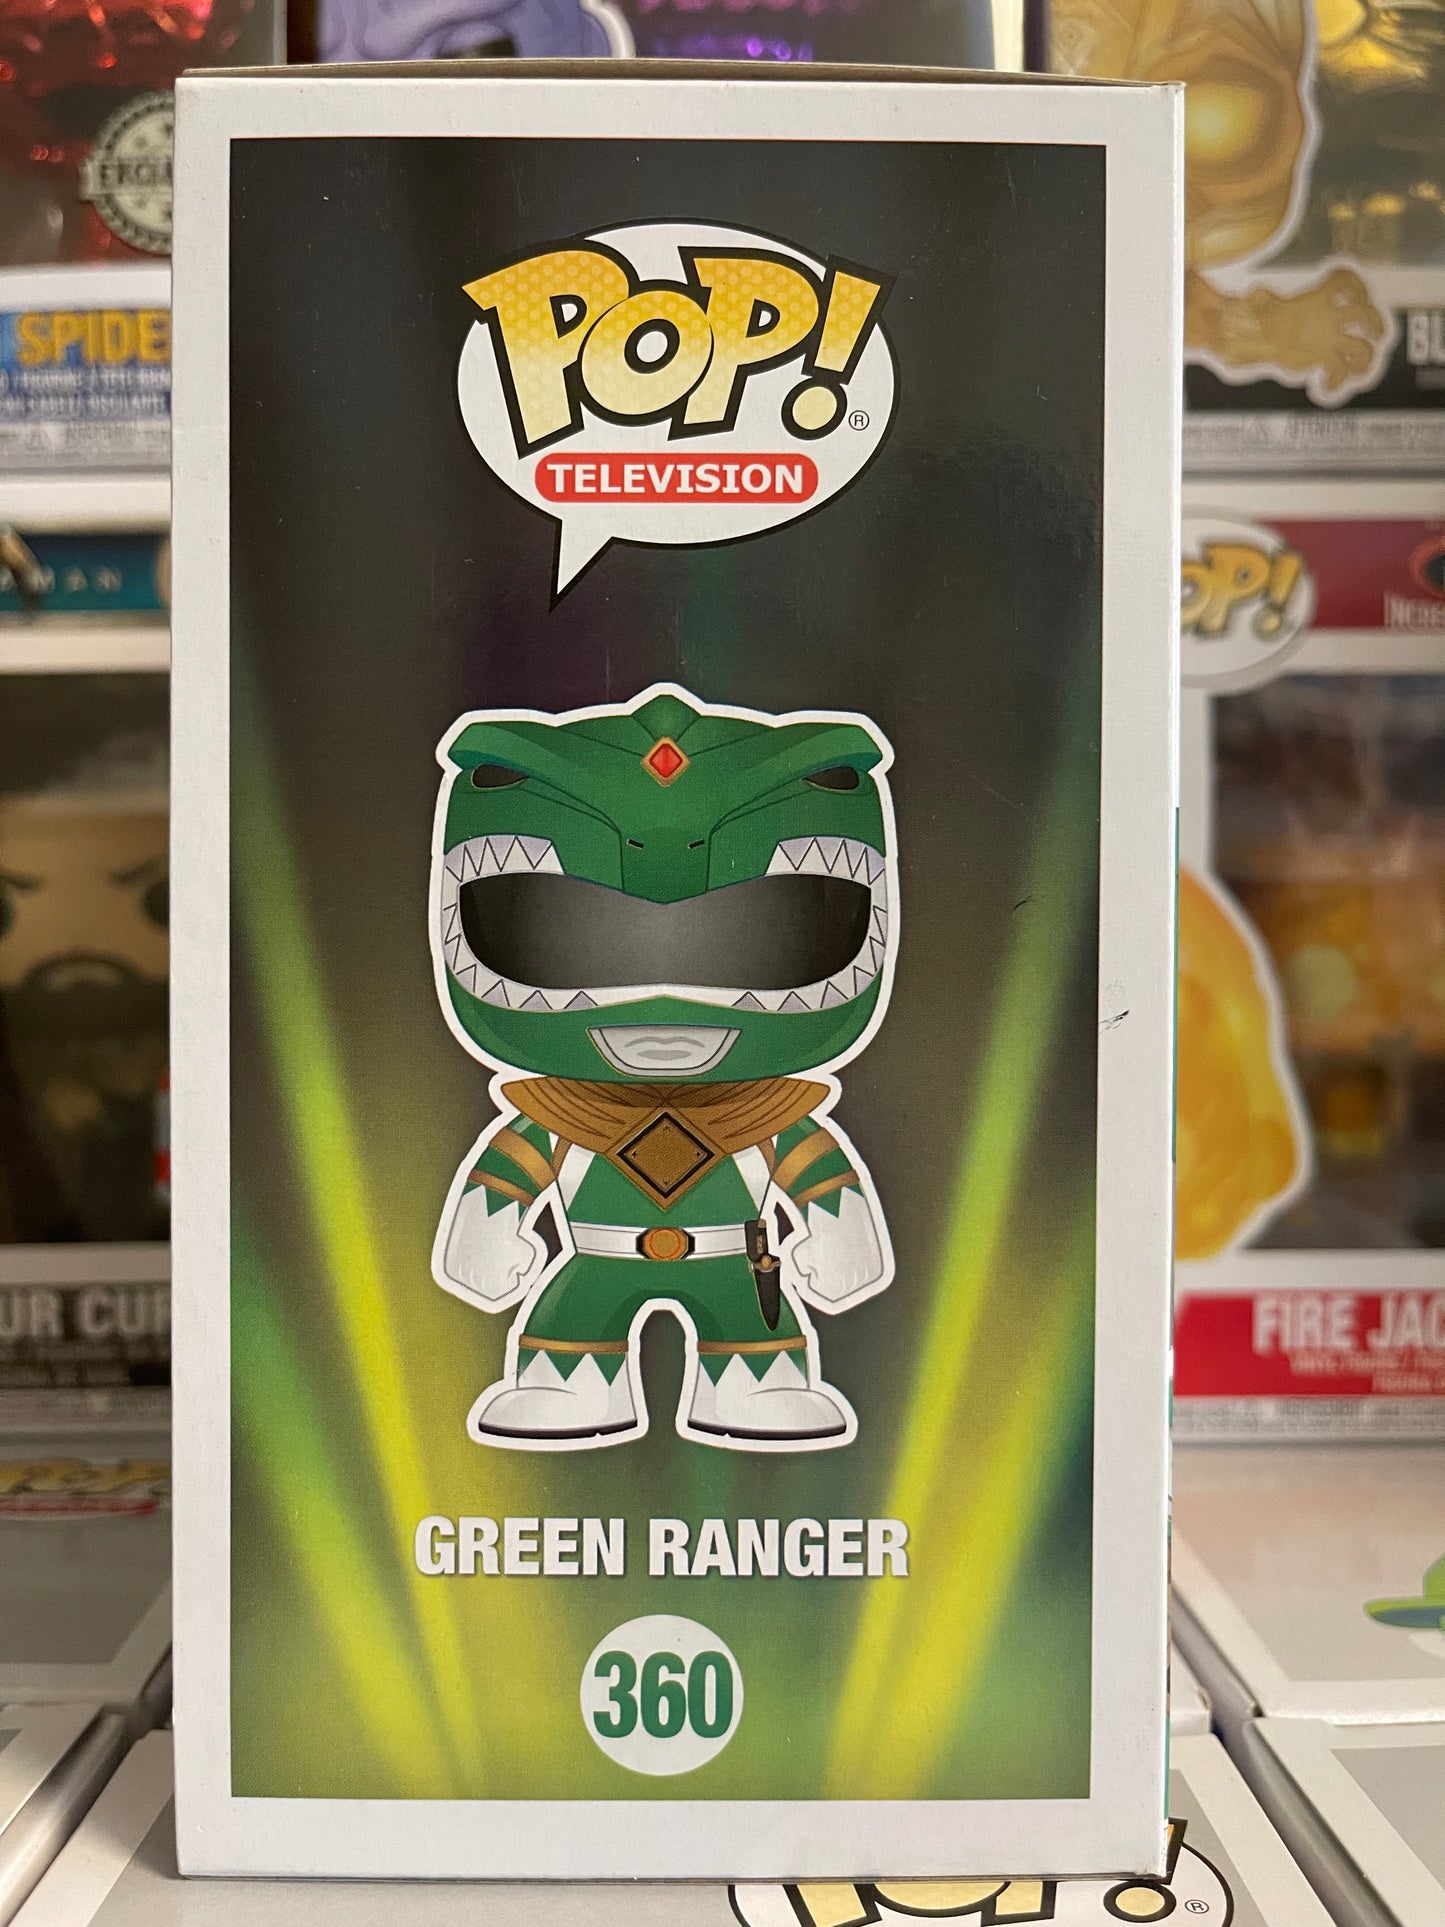 Power Rangers - Green Ranger (Fall Convention) (Glow in the Dark) (360) Vaulted